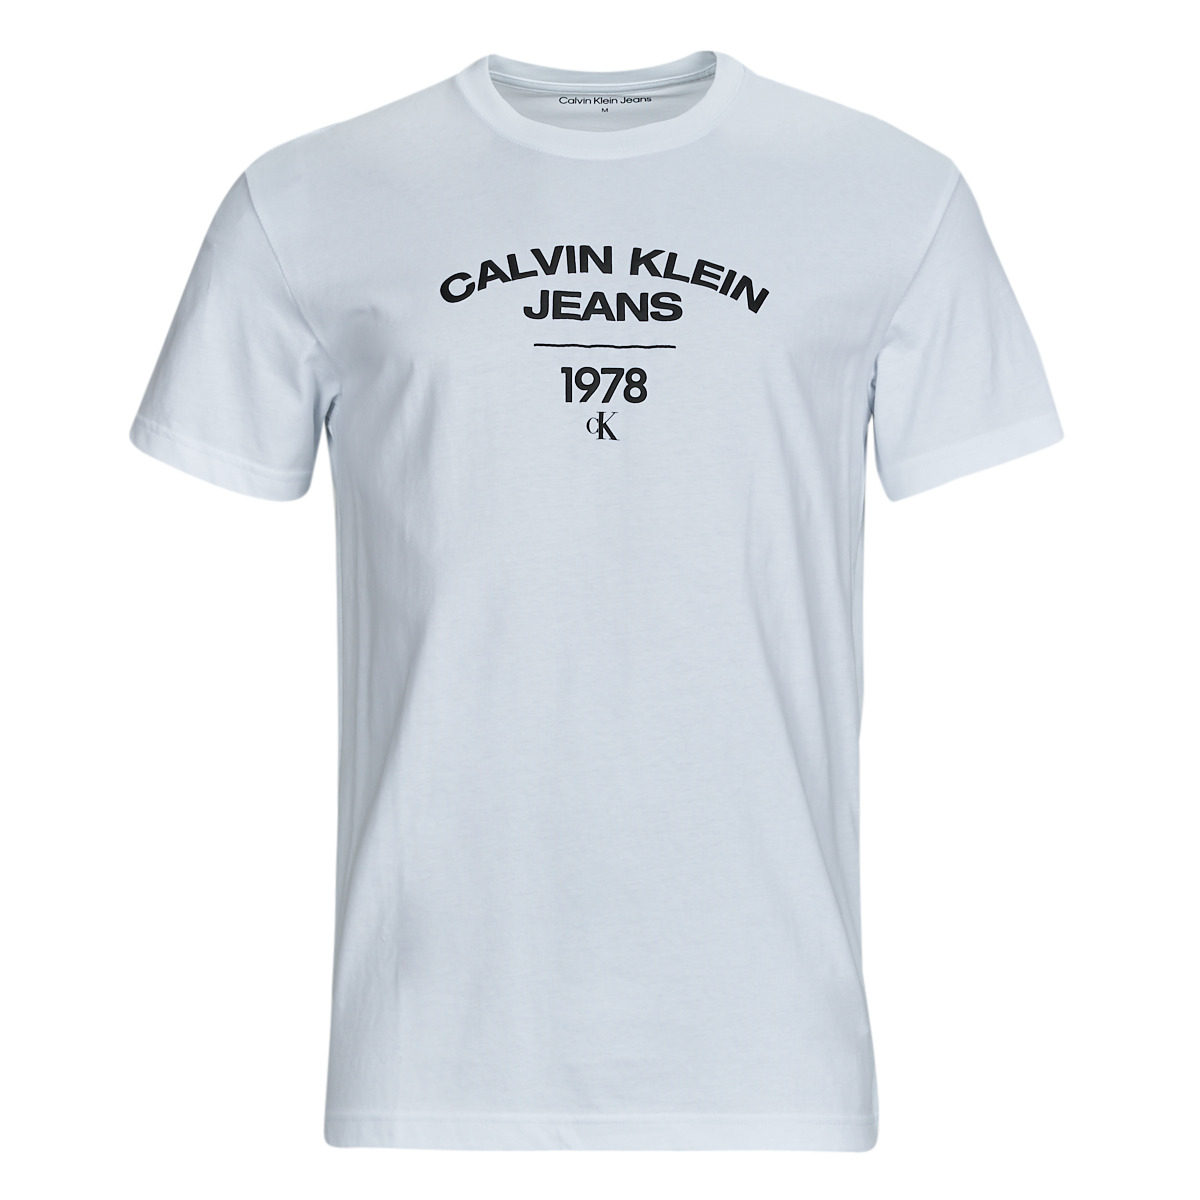 Calvin Klein Jeans VARSITY CURVE LOGO T-SHIRT White - Free delivery |  Spartoo NET ! - Clothing short-sleeved t-shirts Men